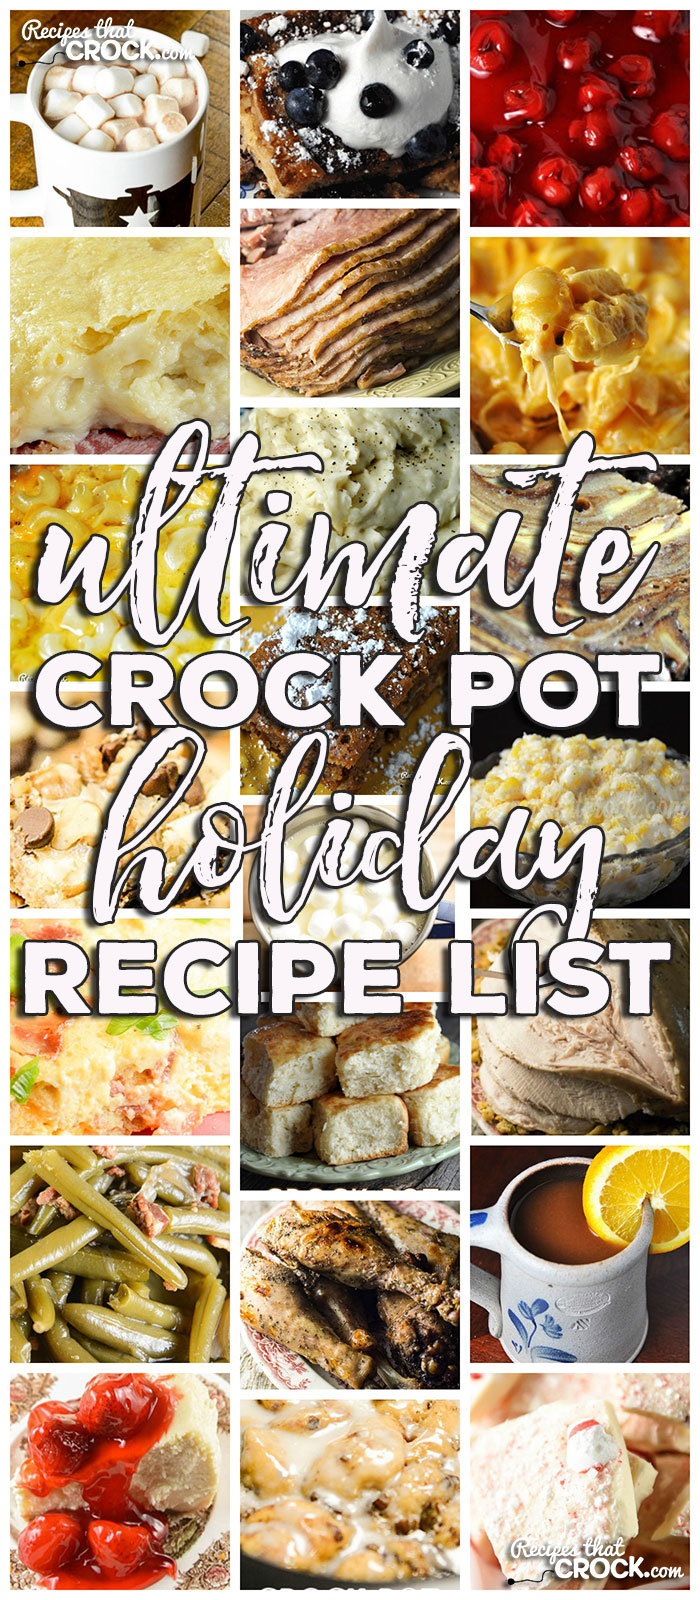 Oh my word! Friends, I have pulled together the Ultimate Crock Pot Holiday Recipe List. And when I say ultimate, I mean ultimate! From delicious slow cooker ham recipes to how to make turkey in your crock pot to must have holiday crock pot side dishes and decadent slow cooker dessert recipes, you don't want to miss all of these must-have recipes! 